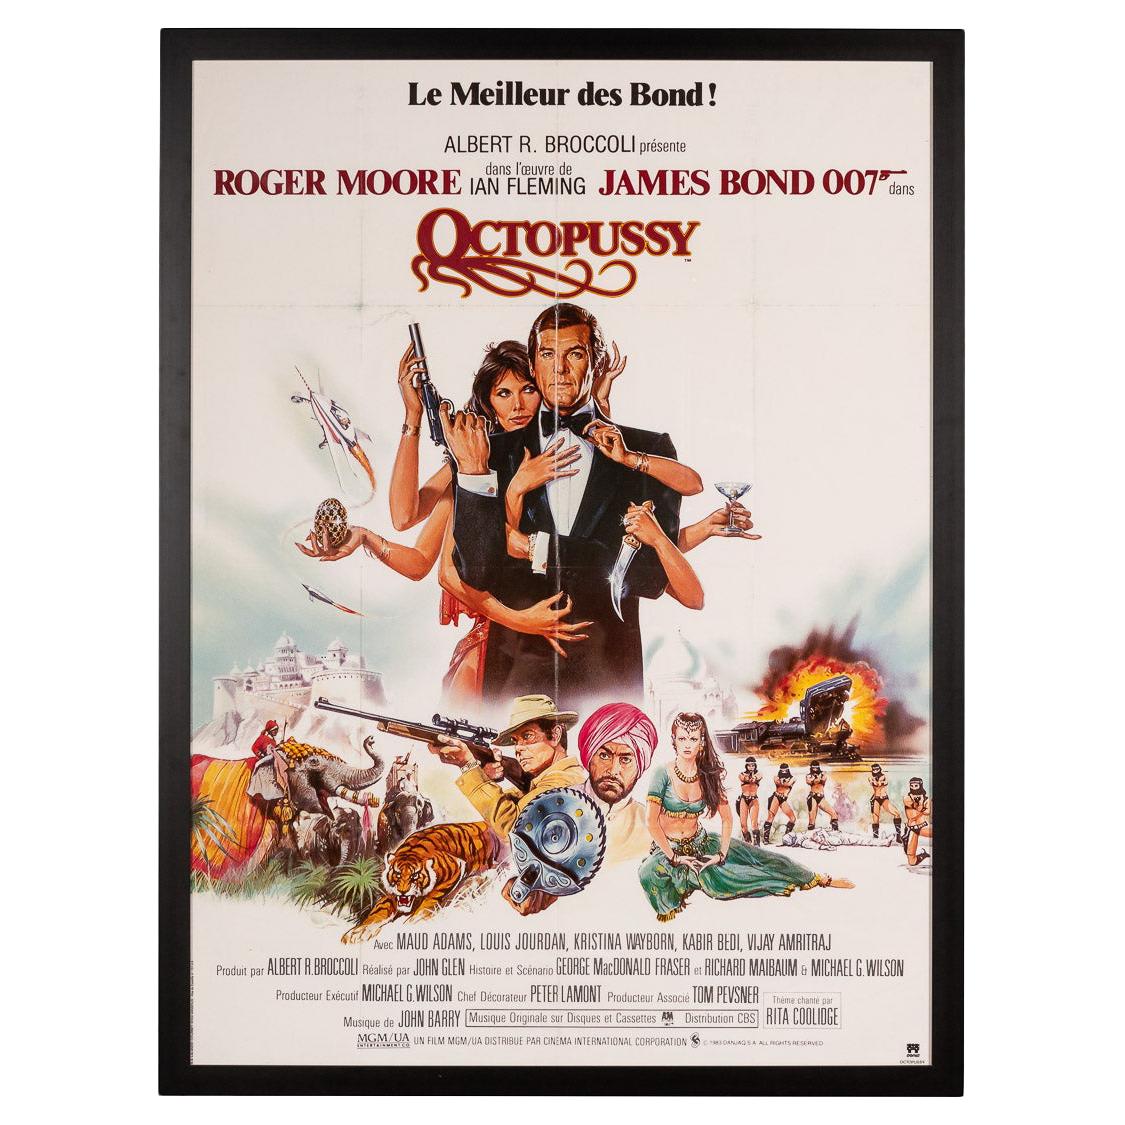 Original French Release James Bond 'Octopussy' Poster, 1983